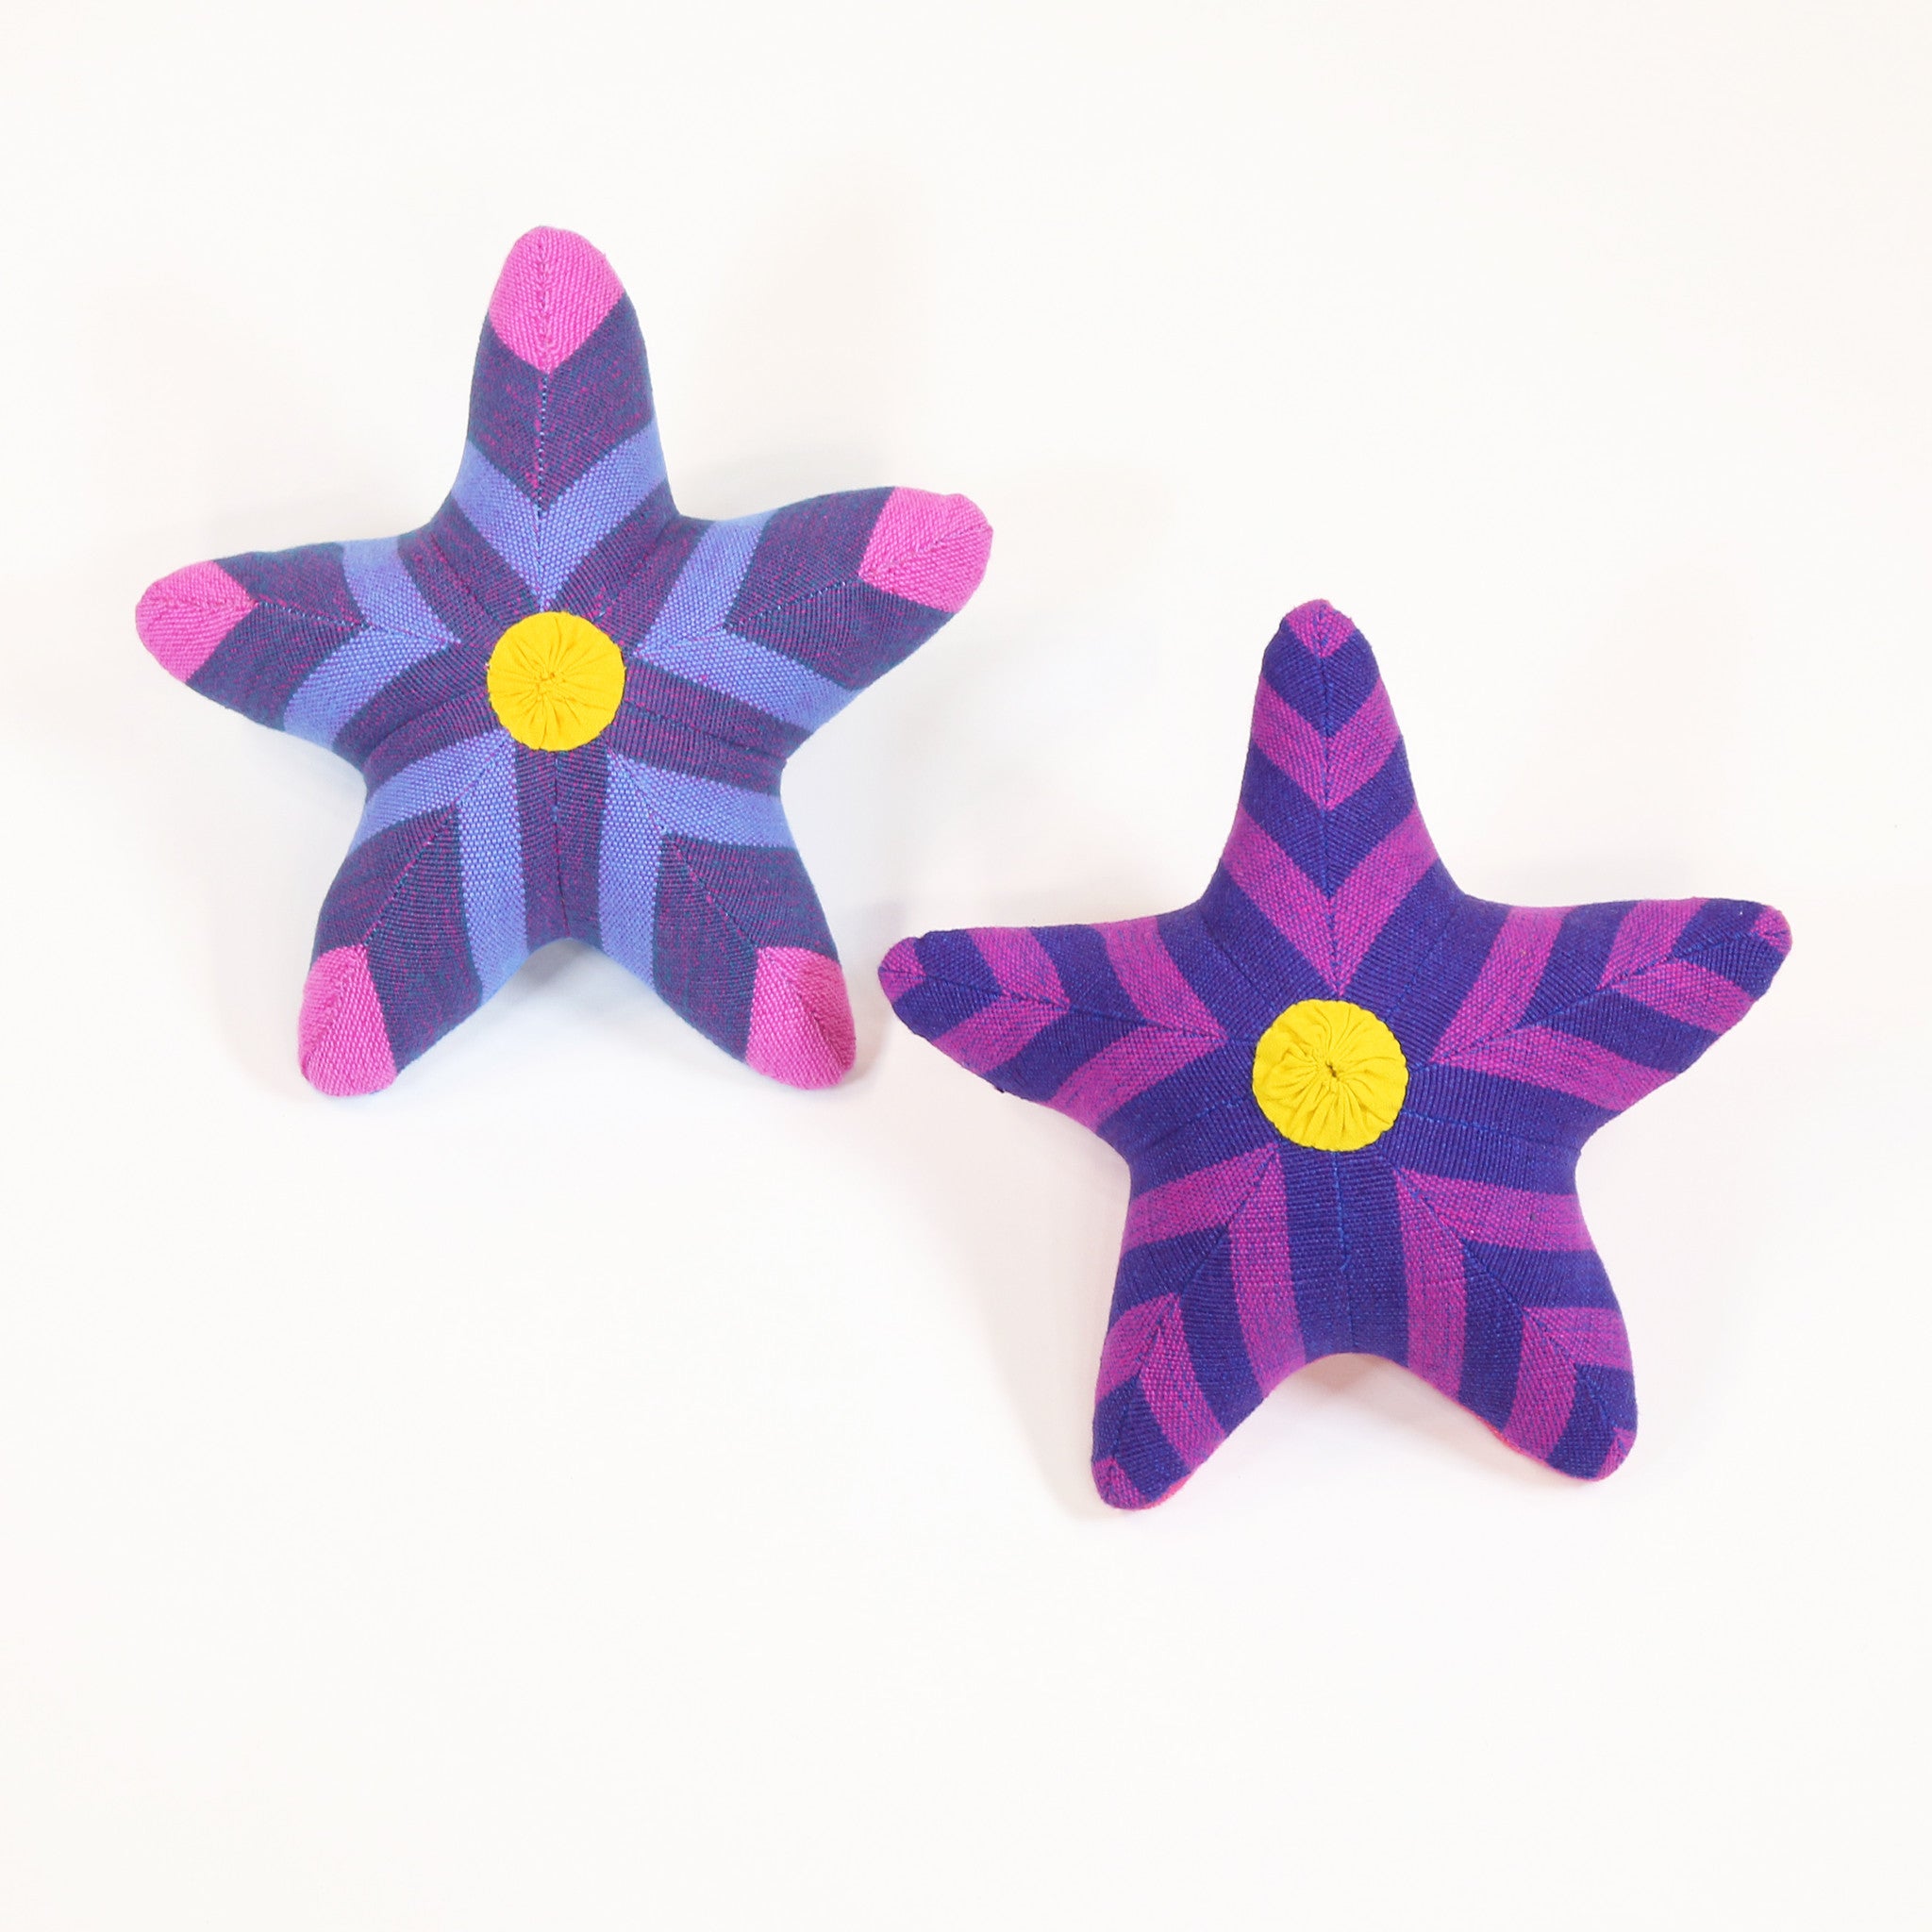 Sybil, the Starfish – all patterns (front view)